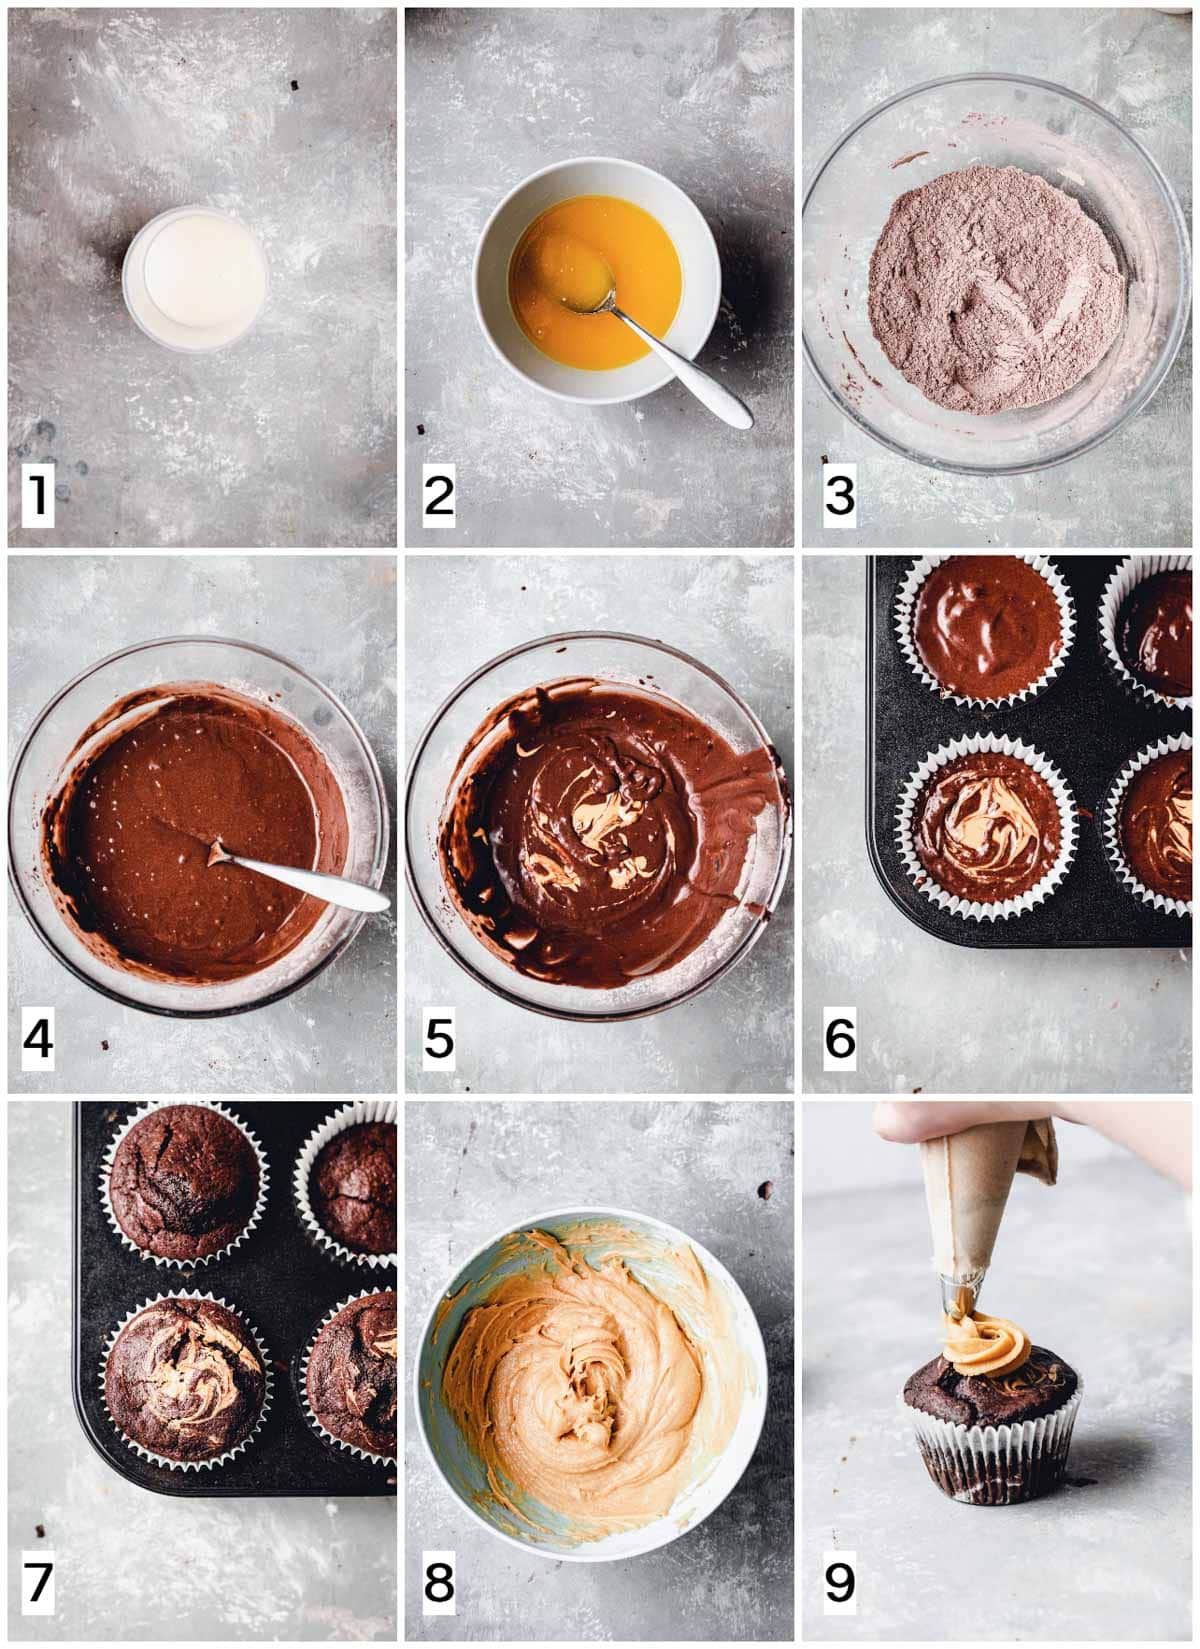 A collage of nine images showing 9 steps in making a cupcake. 